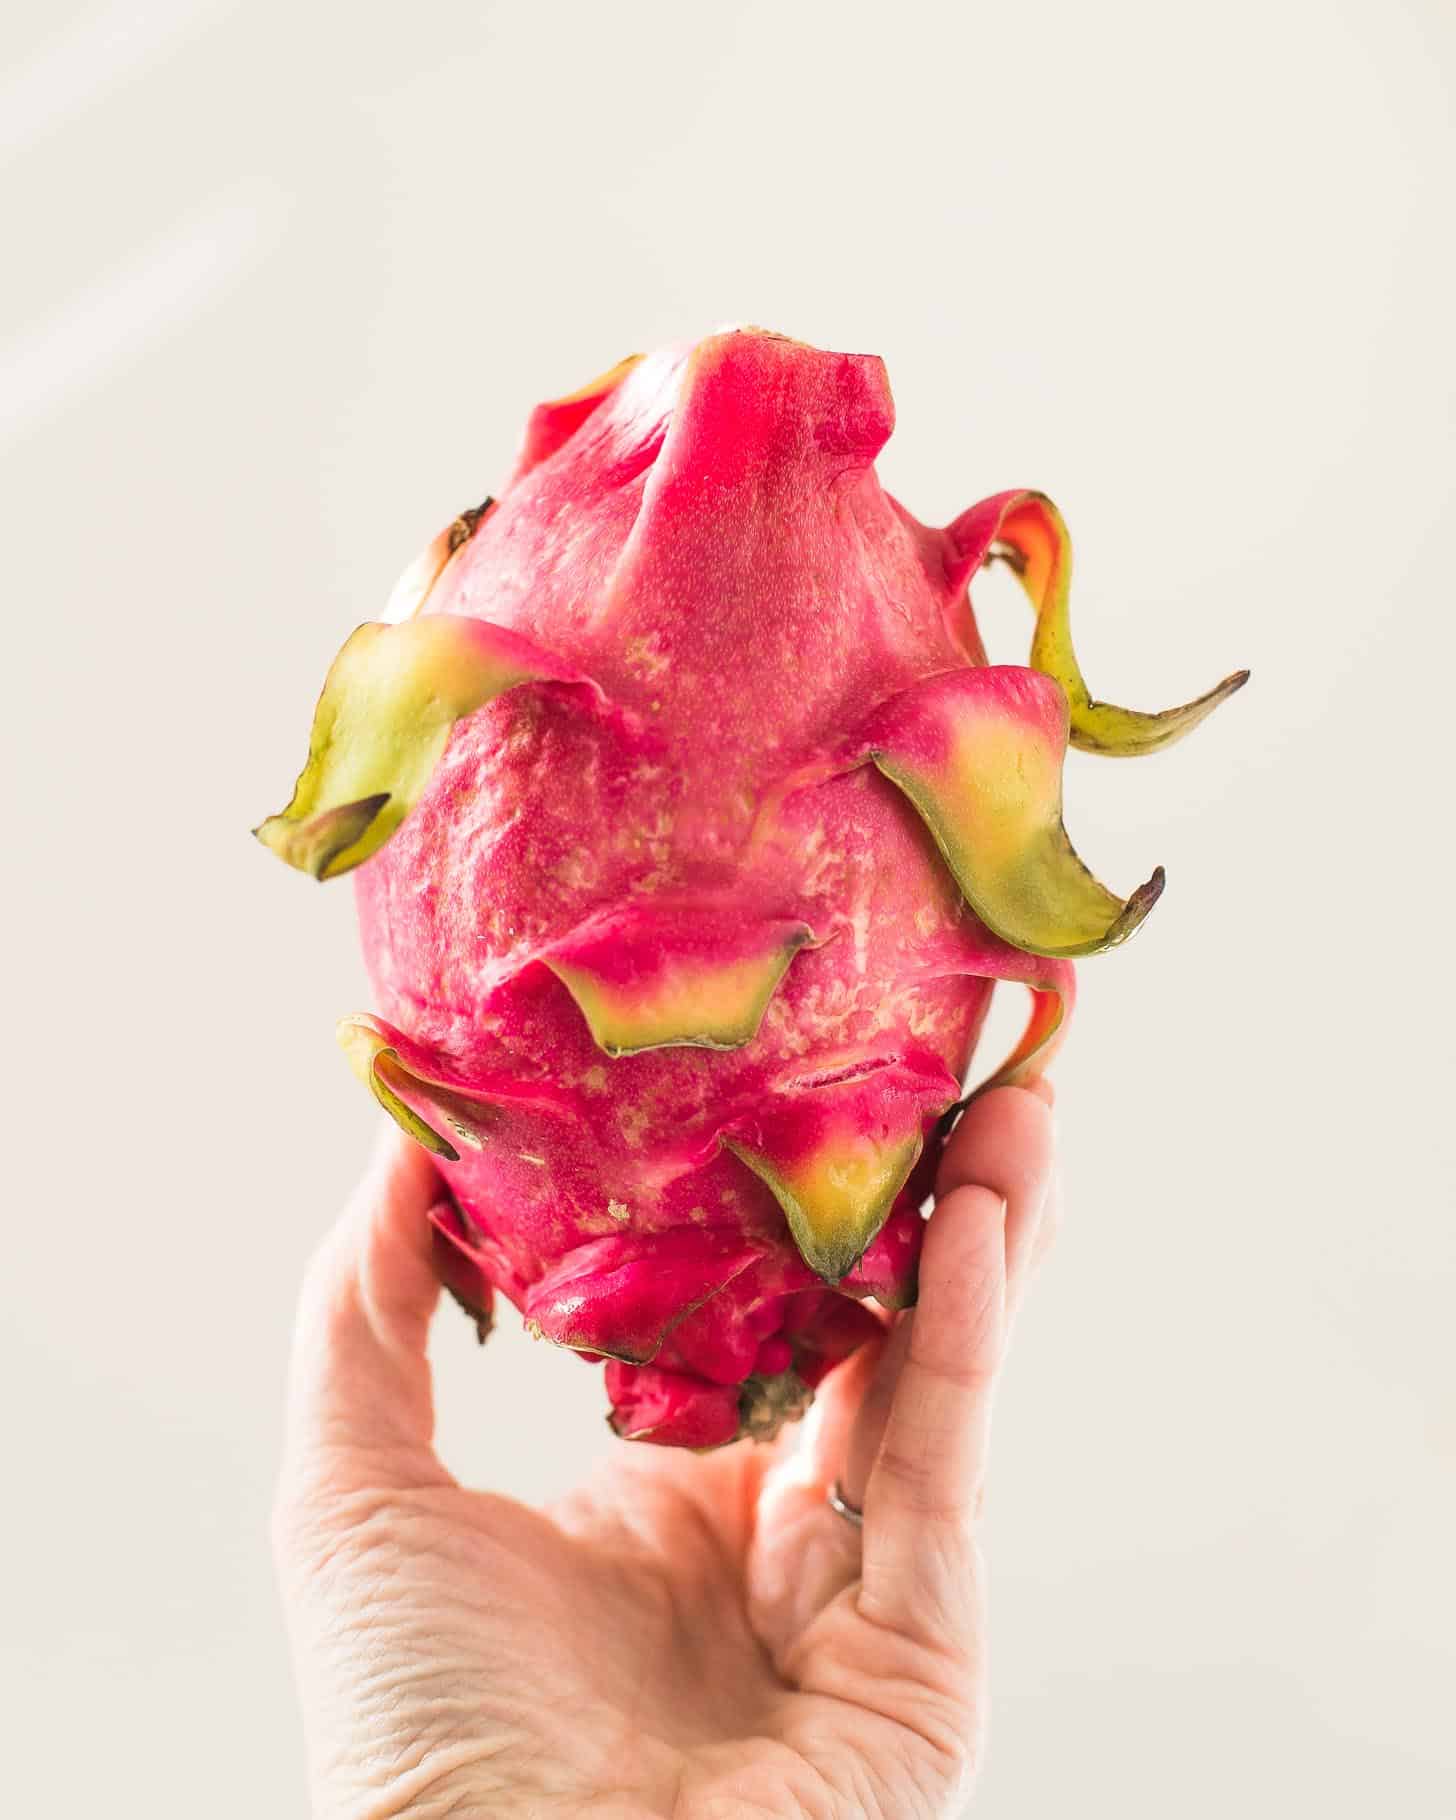 a hand holding a whole Dragon Fruit